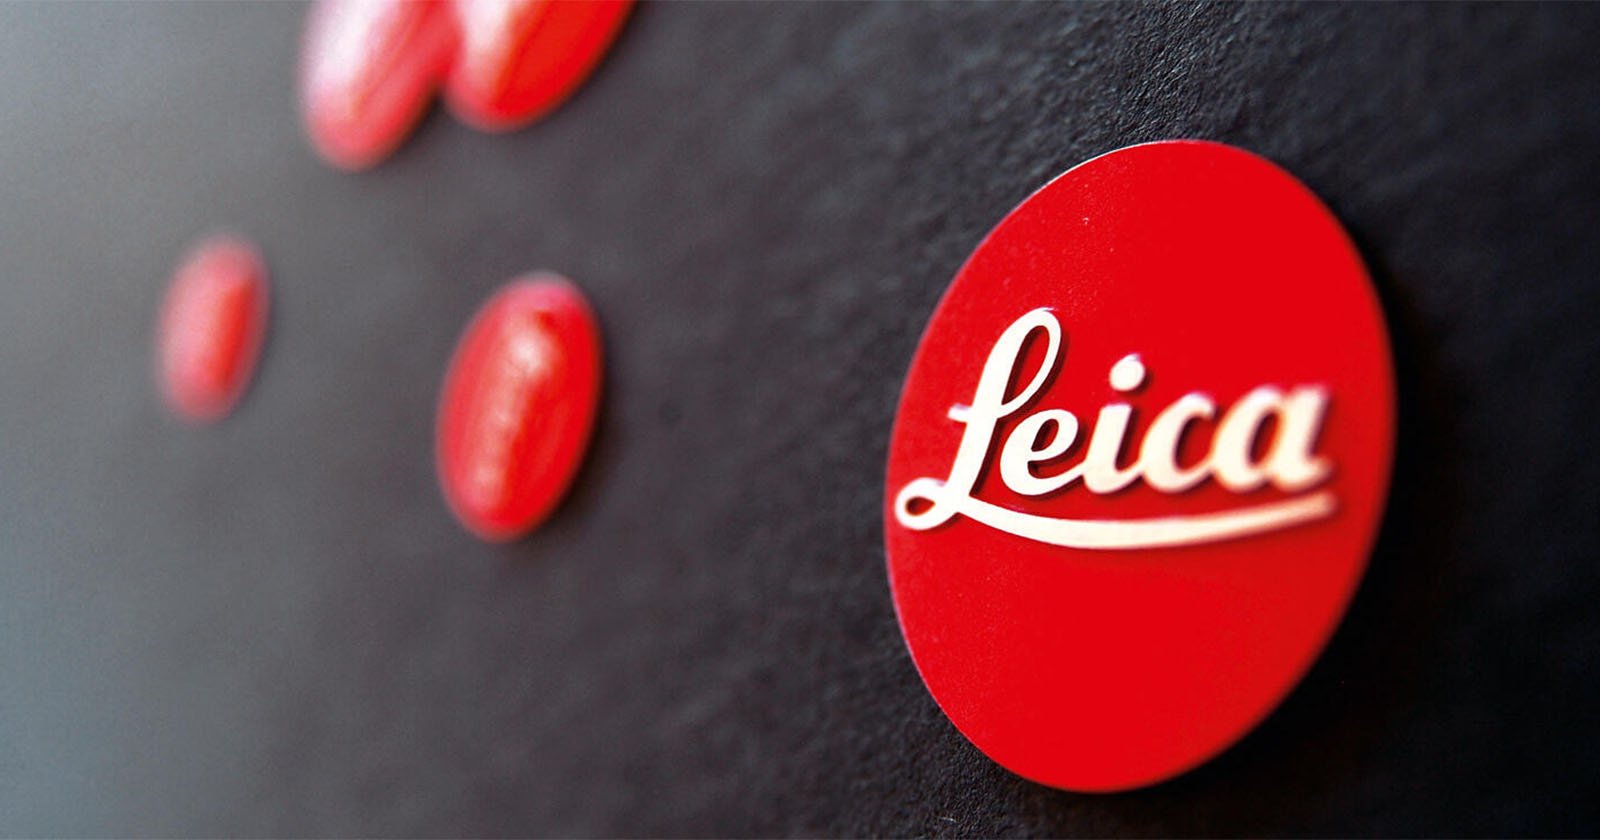 Leica Sets Another Sales Record, Shows the Power of Premium Products